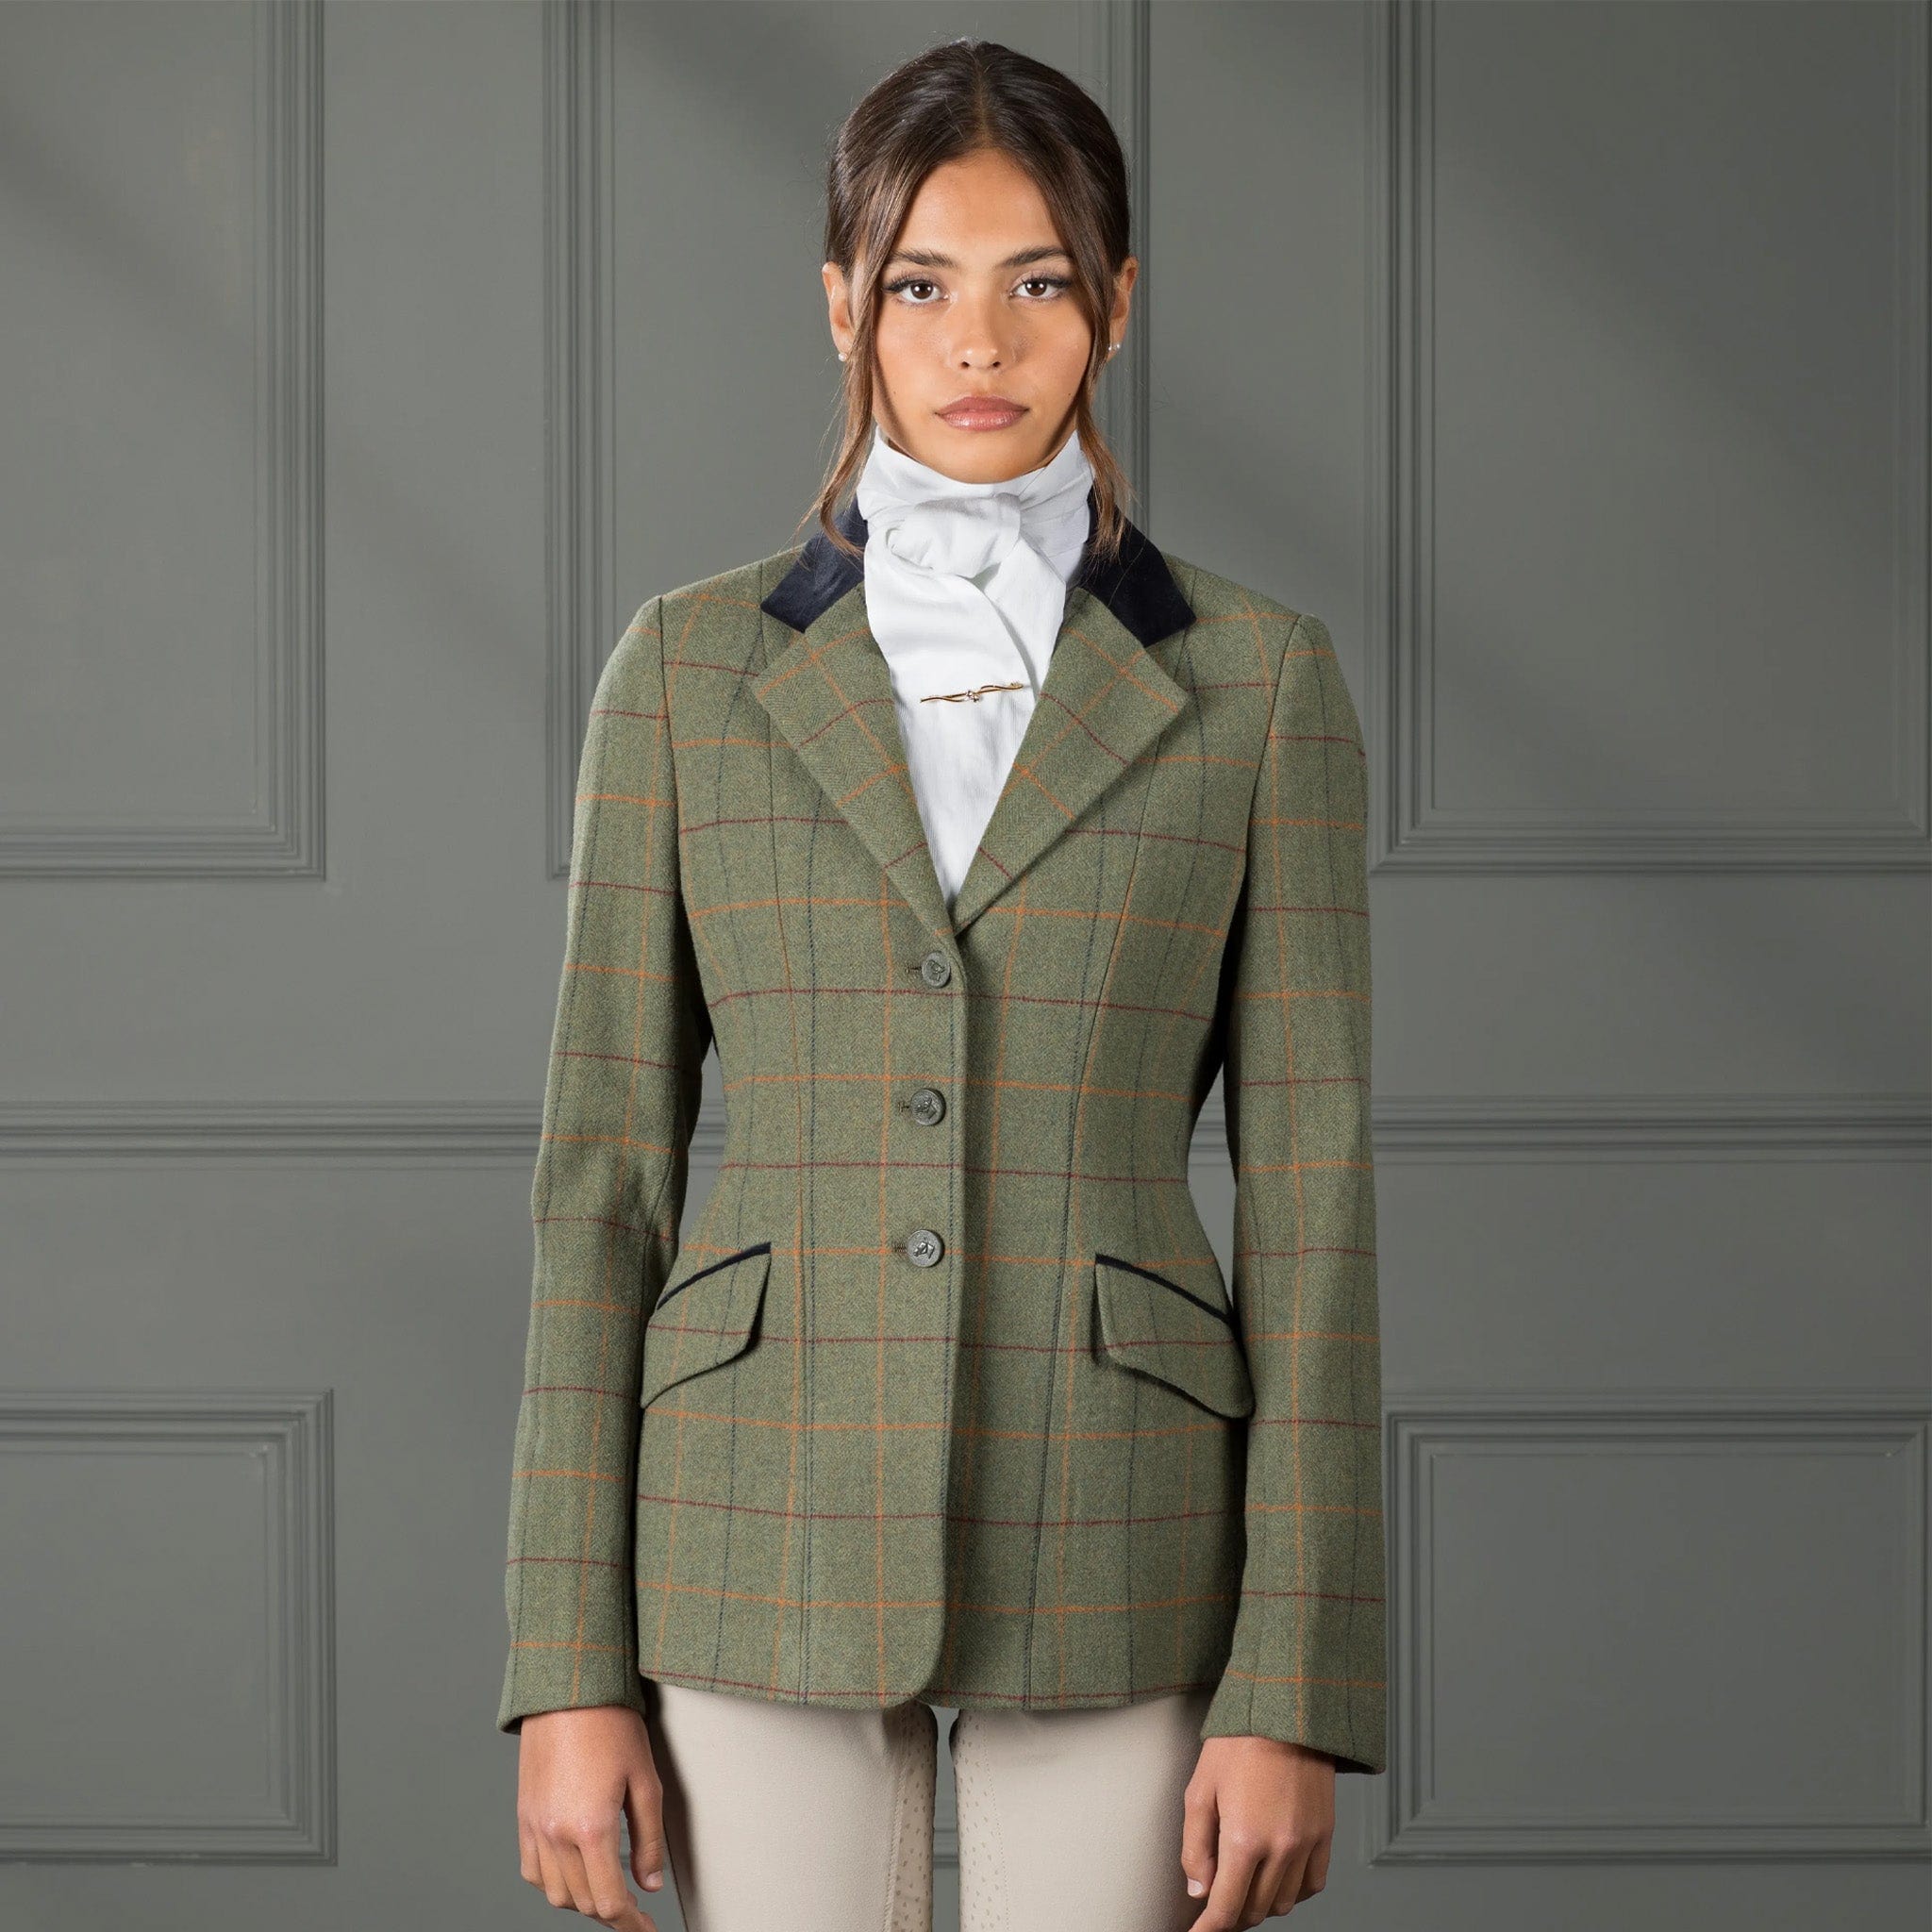 Aubrion Saratoga Tweed Show Jacket | Free UK Delivery Available